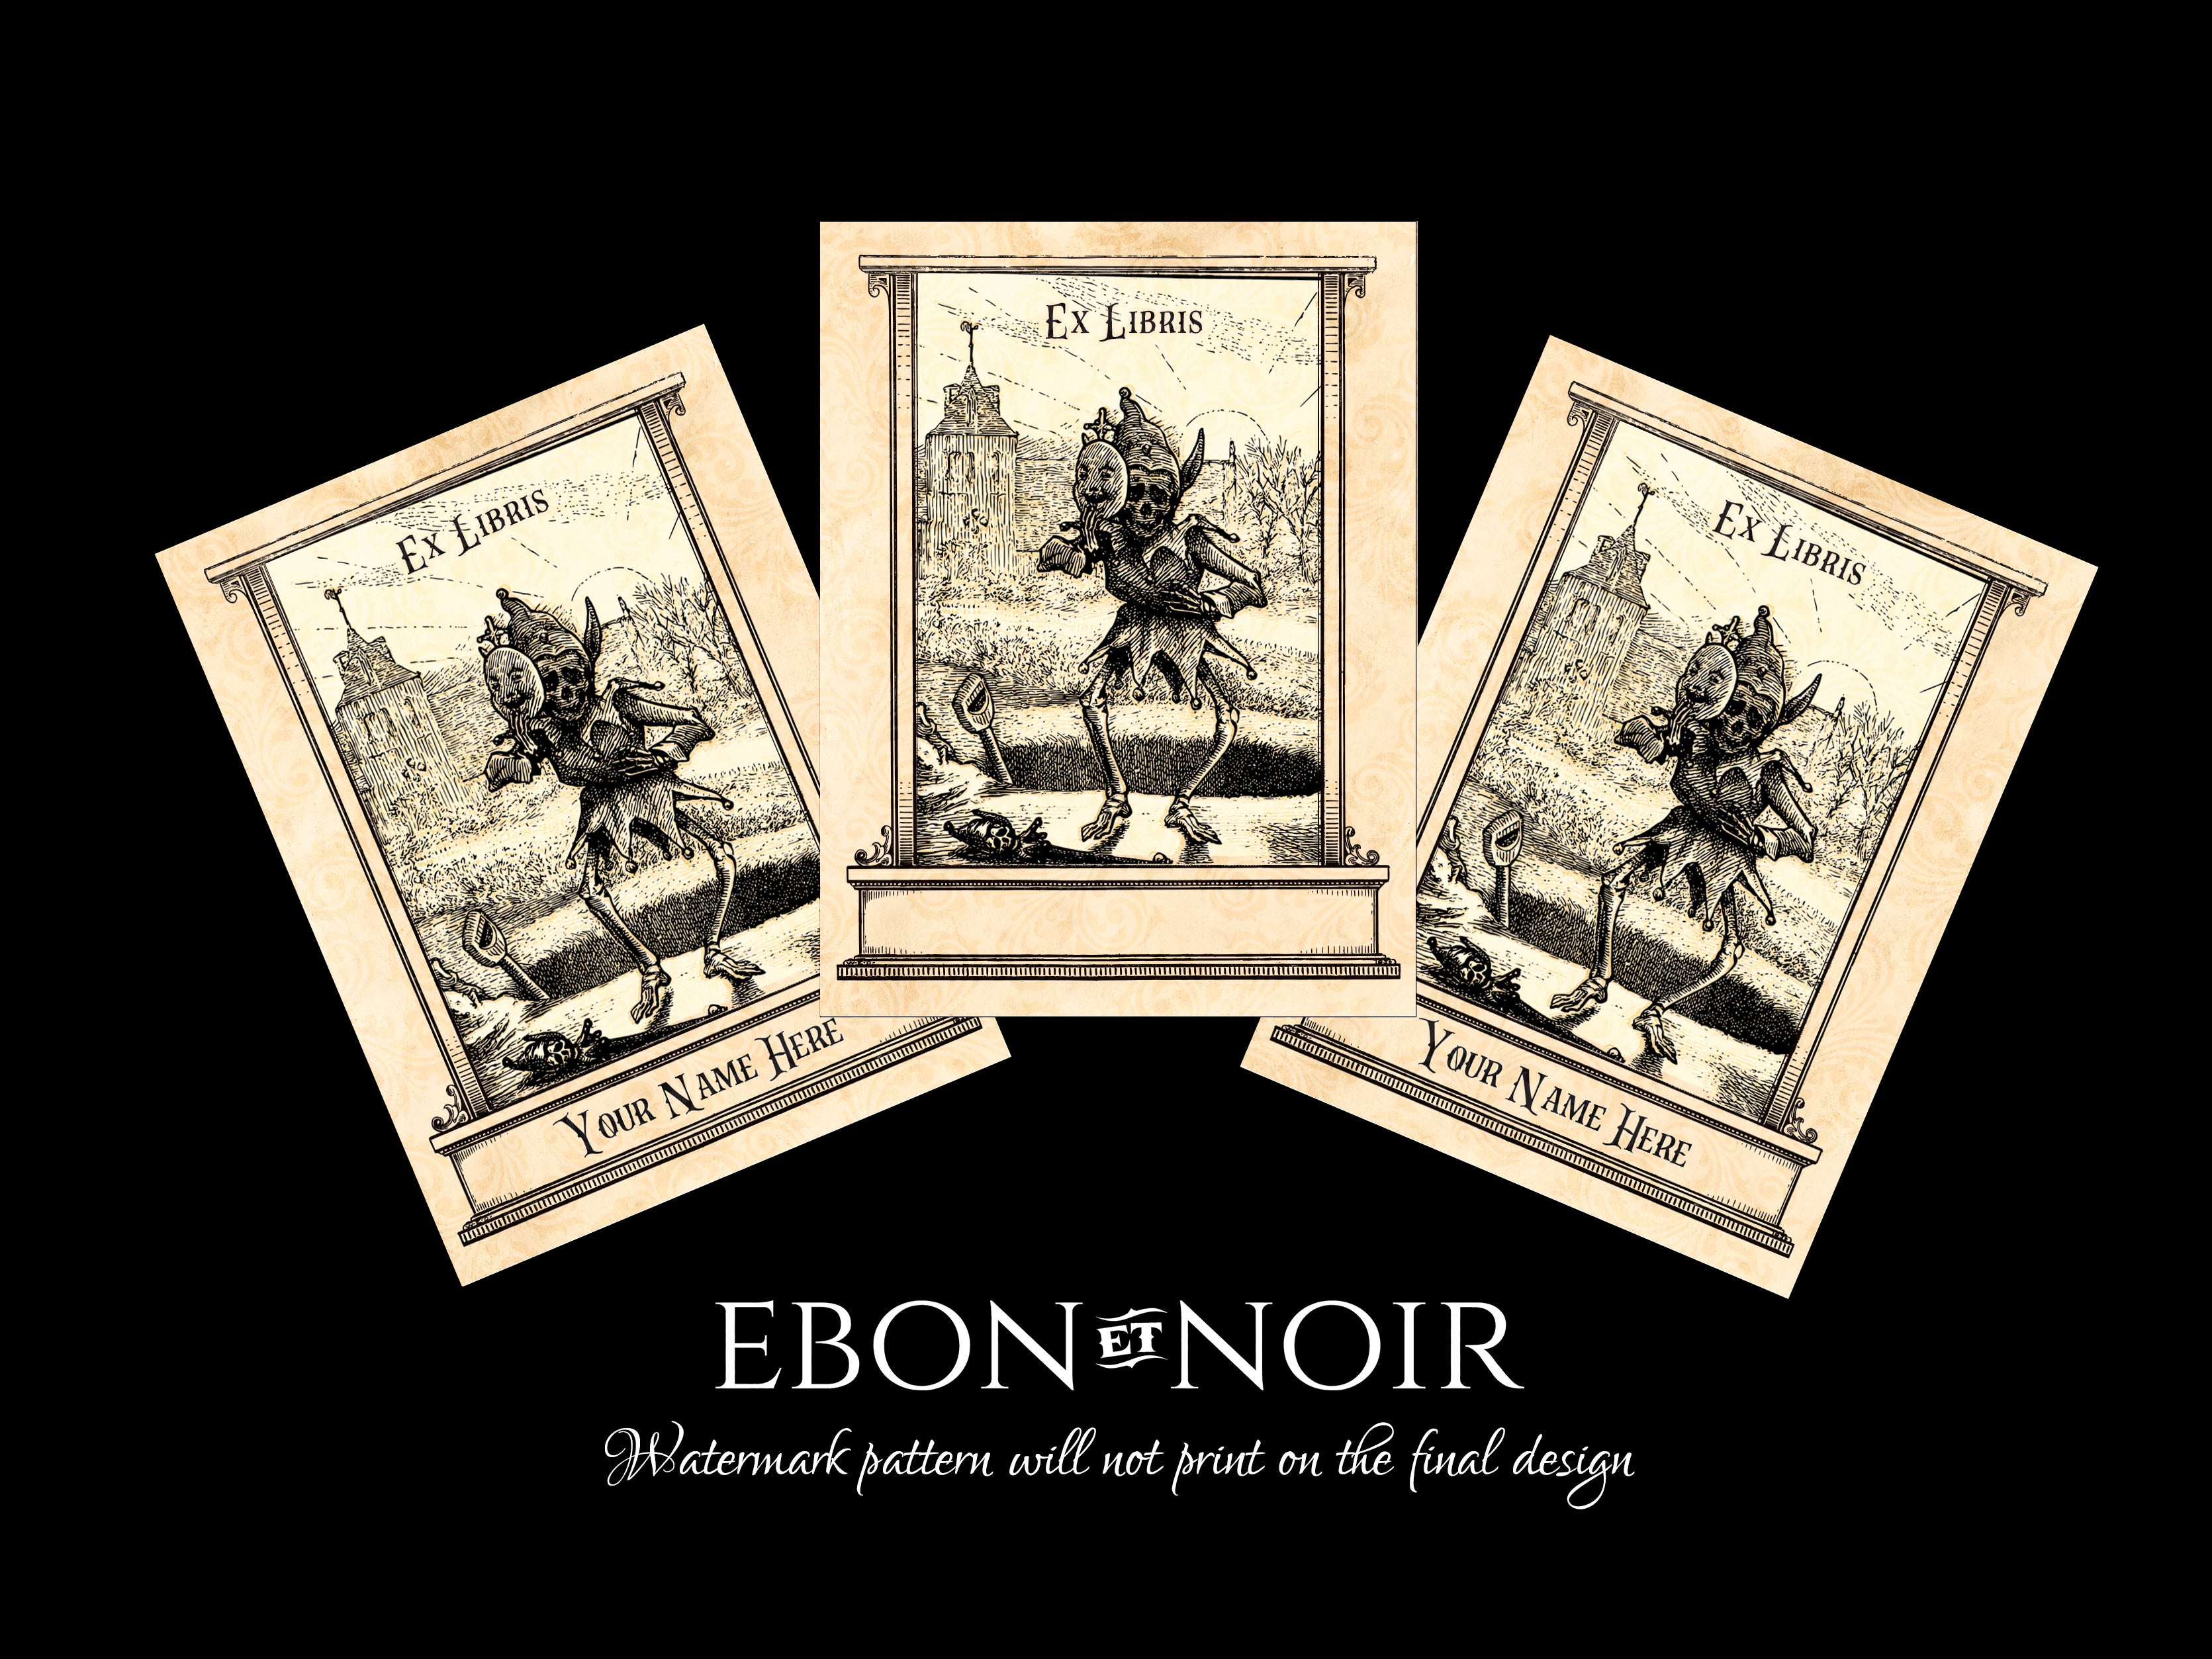 Grinning Skeleton, Personalized Gothic Ex-Libris Bookplates, Crafted on Traditional Gummed Paper, 3in x 4in, Set of 30